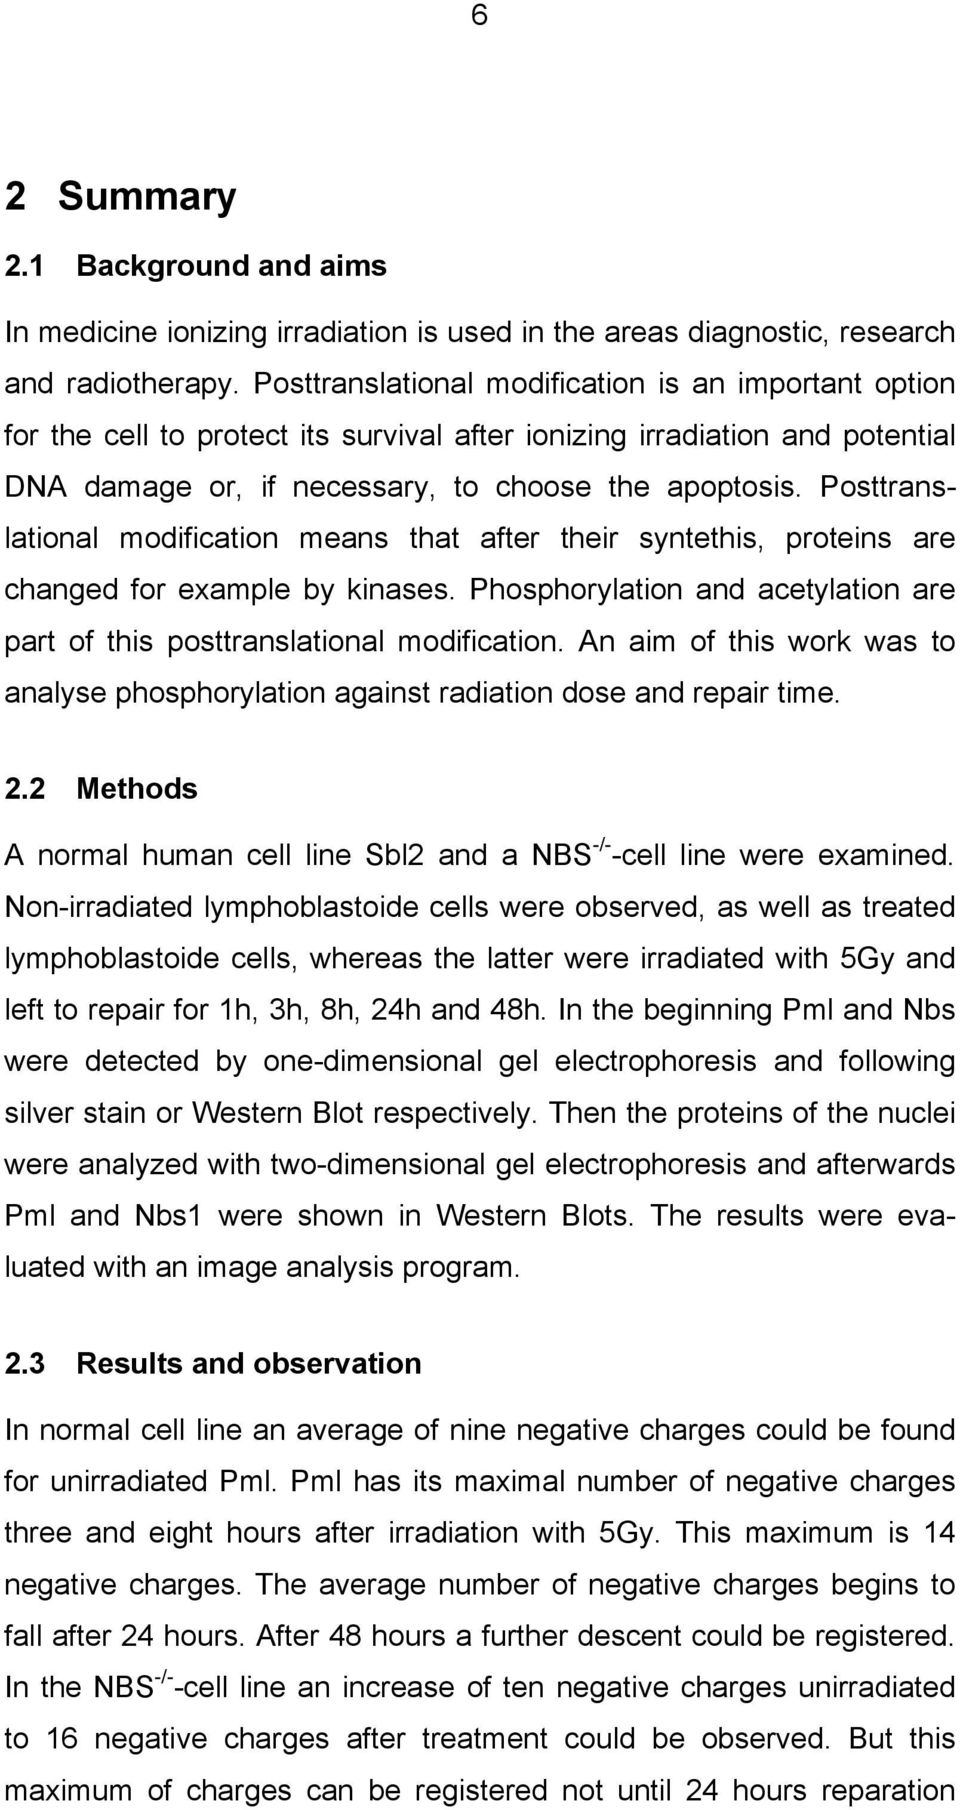 Posttranslational modification means that after their syntethis, proteins are changed for example by kinases. Phosphorylation and acetylation are part of this posttranslational modification.